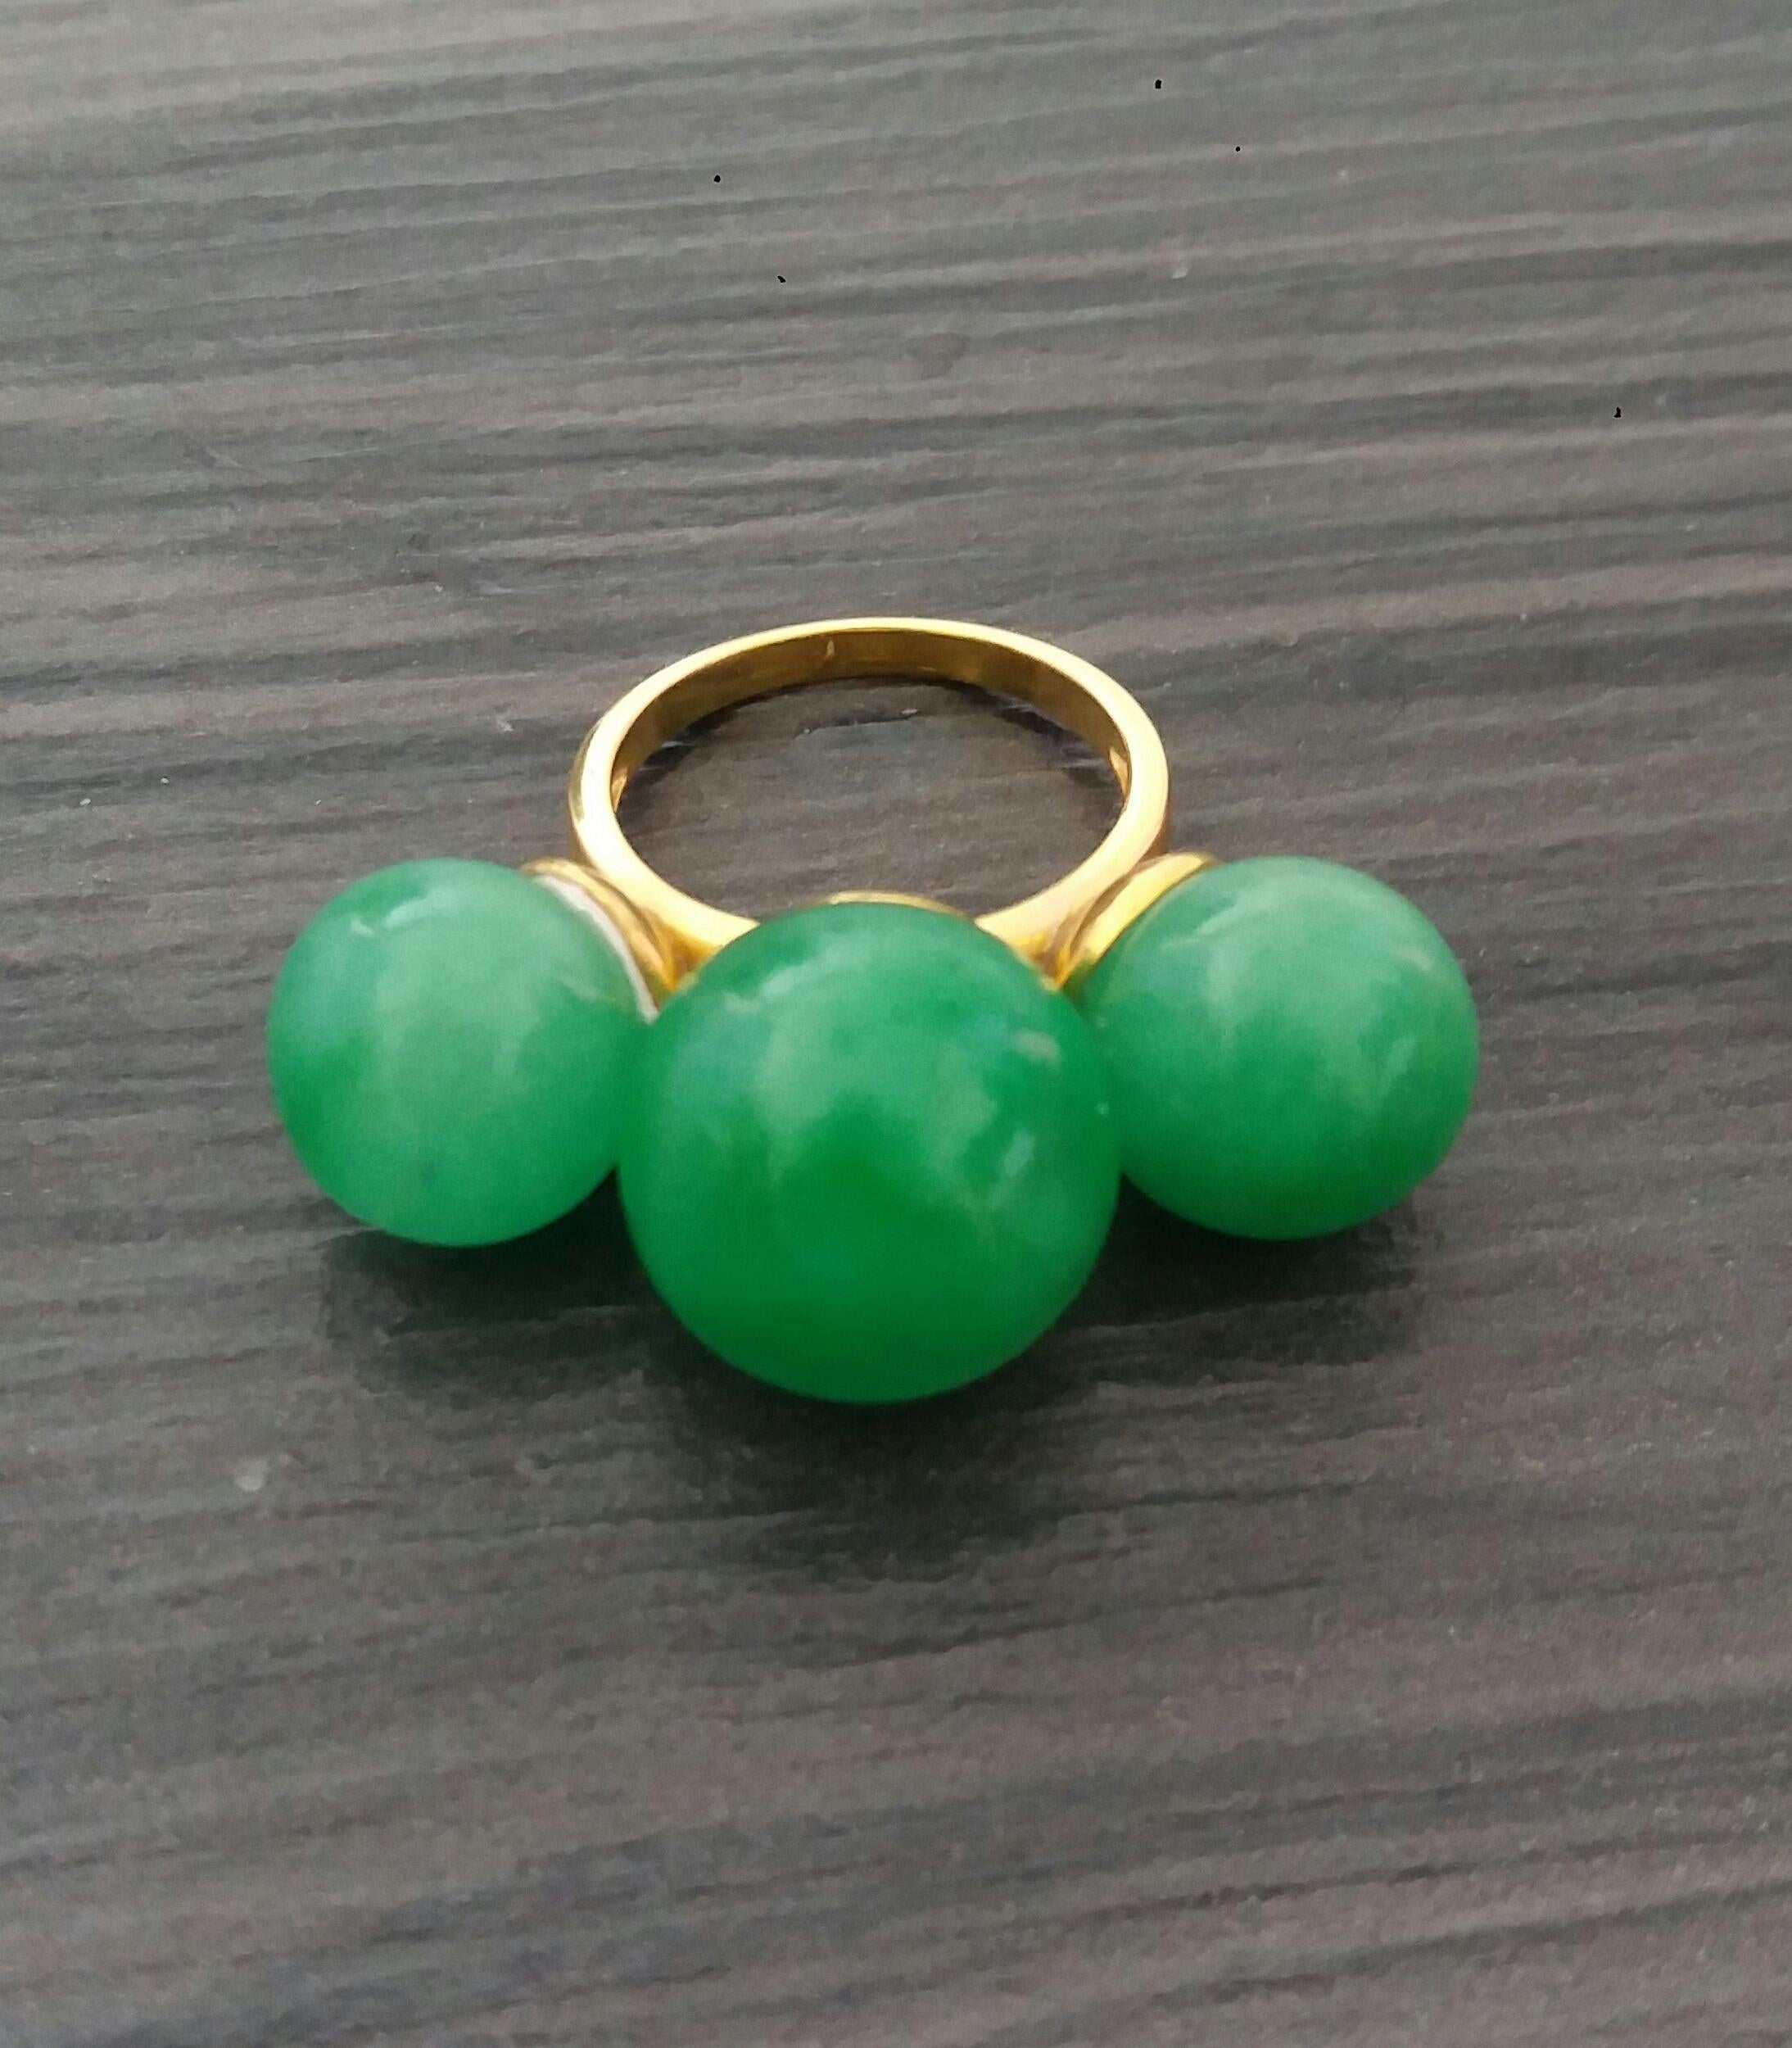 Three Round Plain Burma Jade Beads 14K Yellow Gold Cocktail Ring For Sale 4